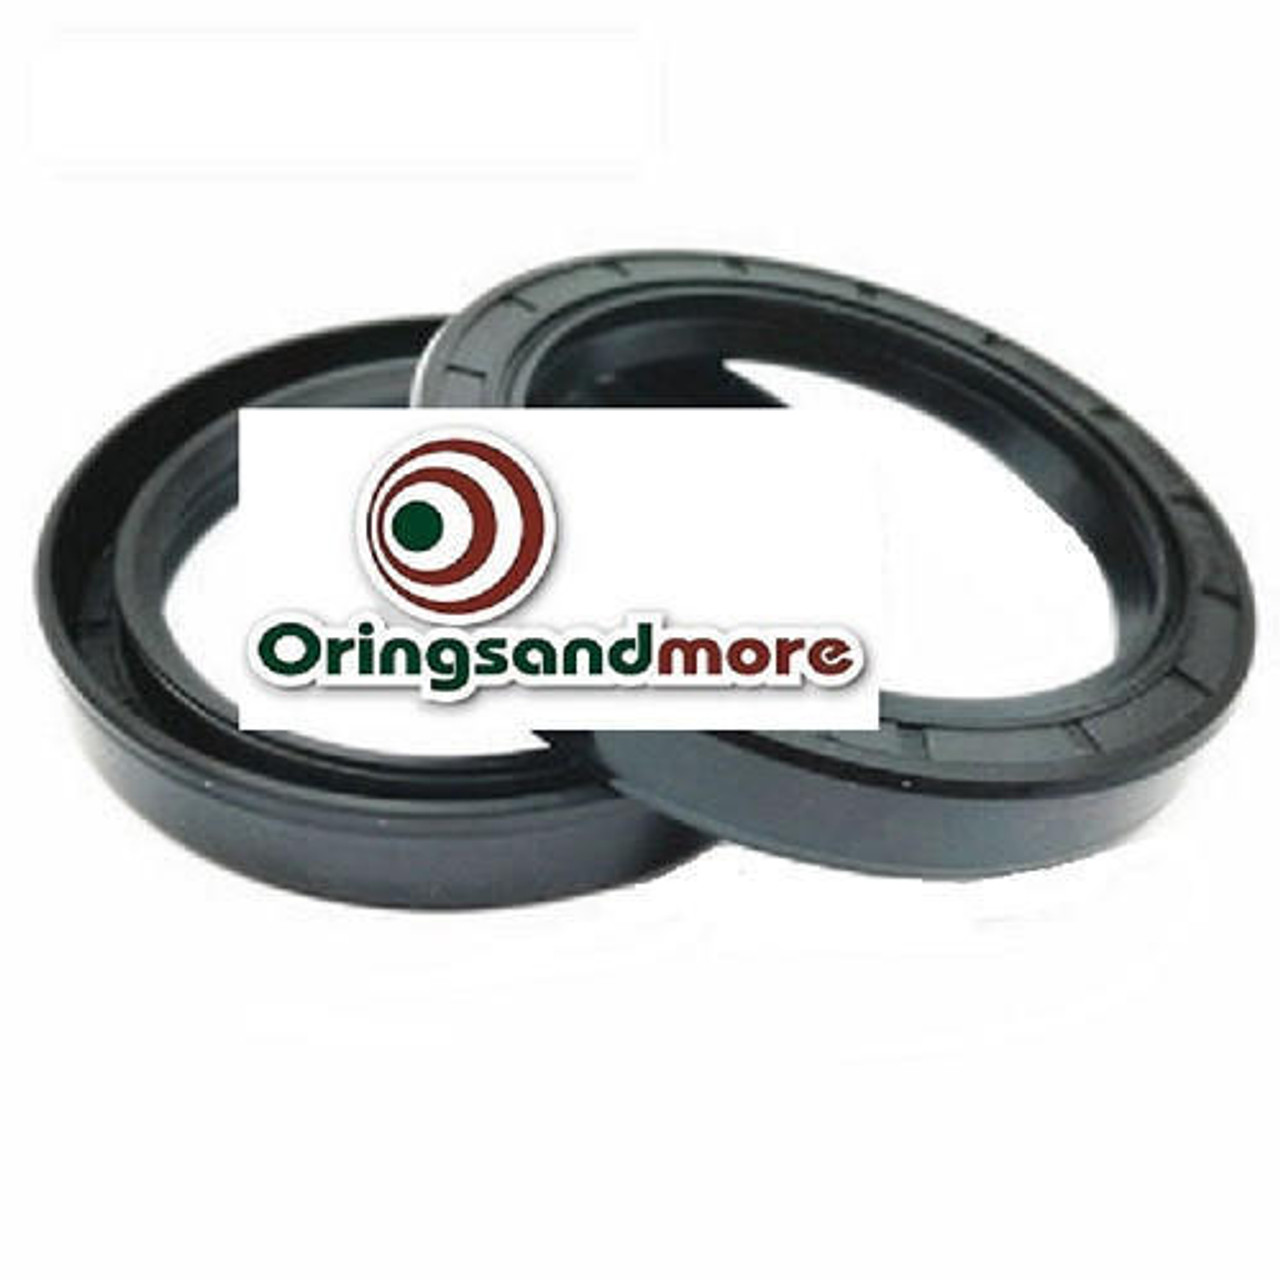 Metric Oil Shaft Seal 26 x 37 x 10mm Double Lip Price for 1 pc